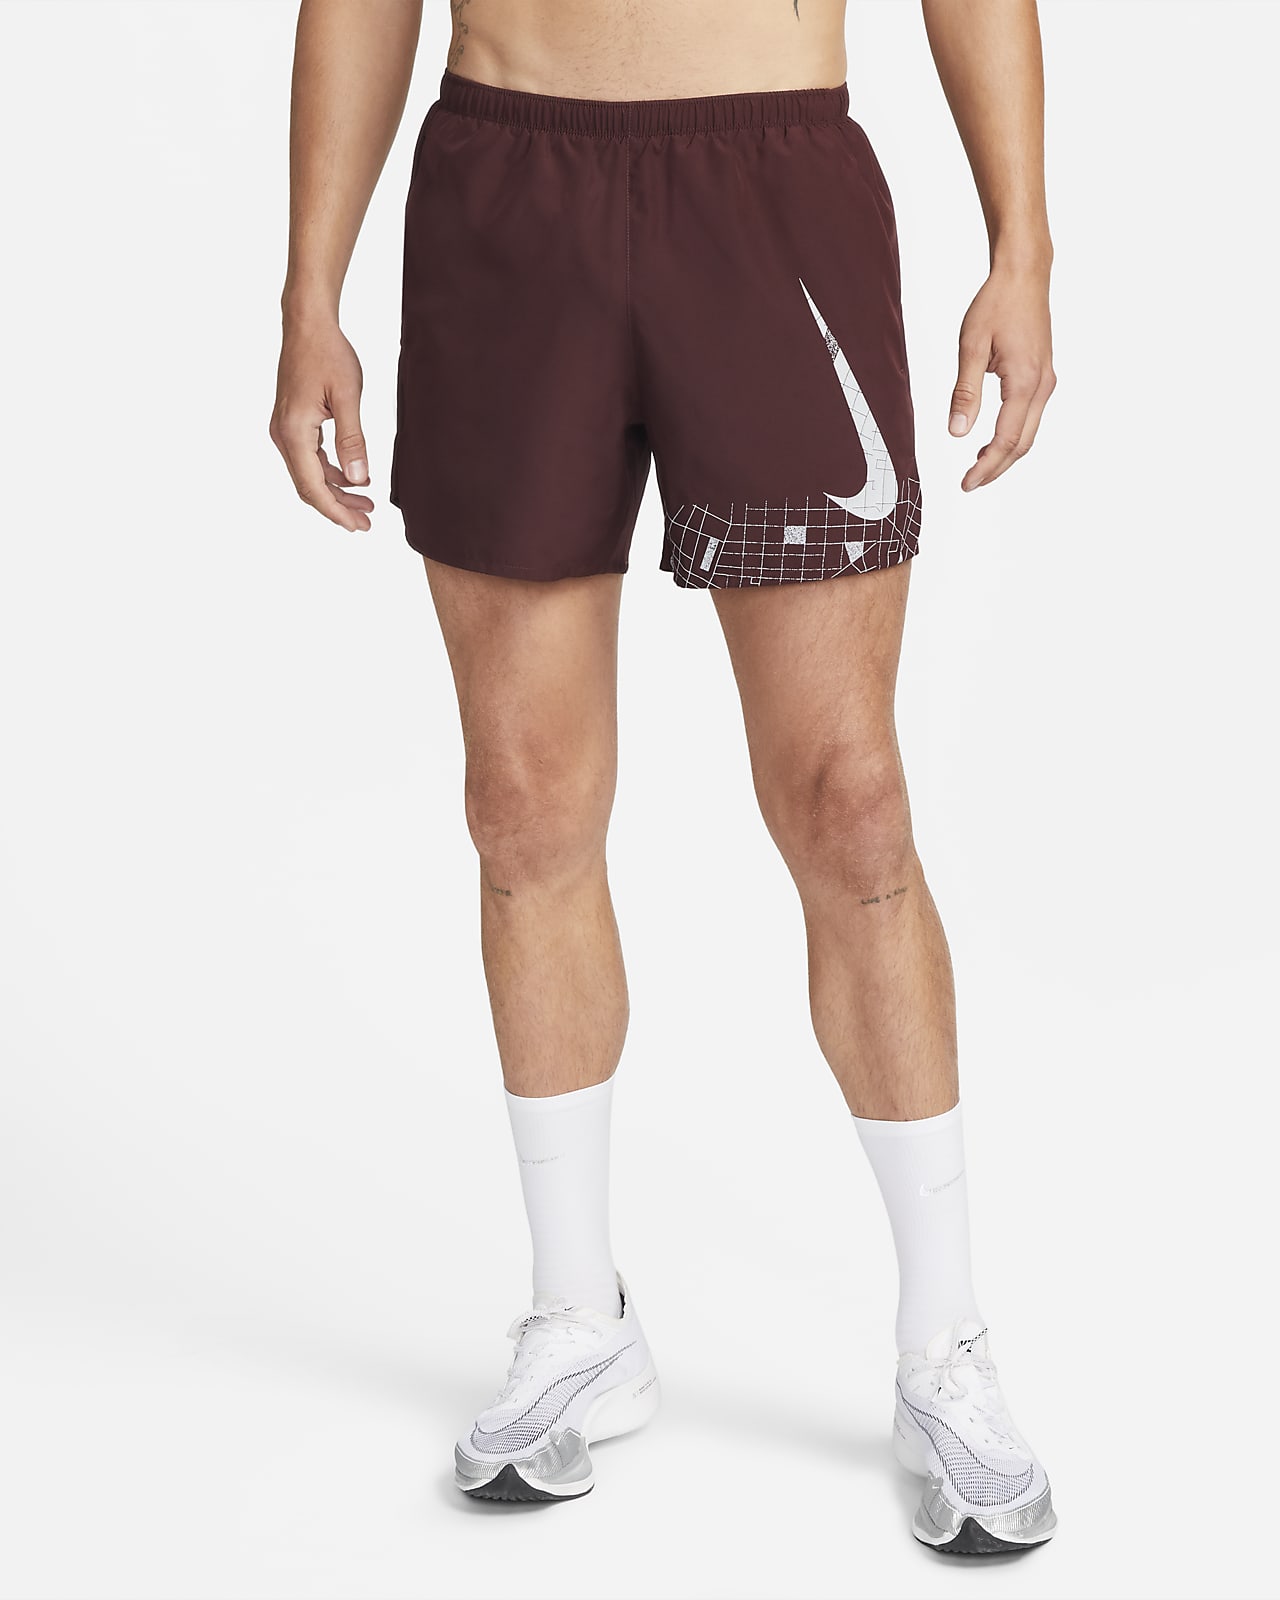 nike men's shorts with inner brief